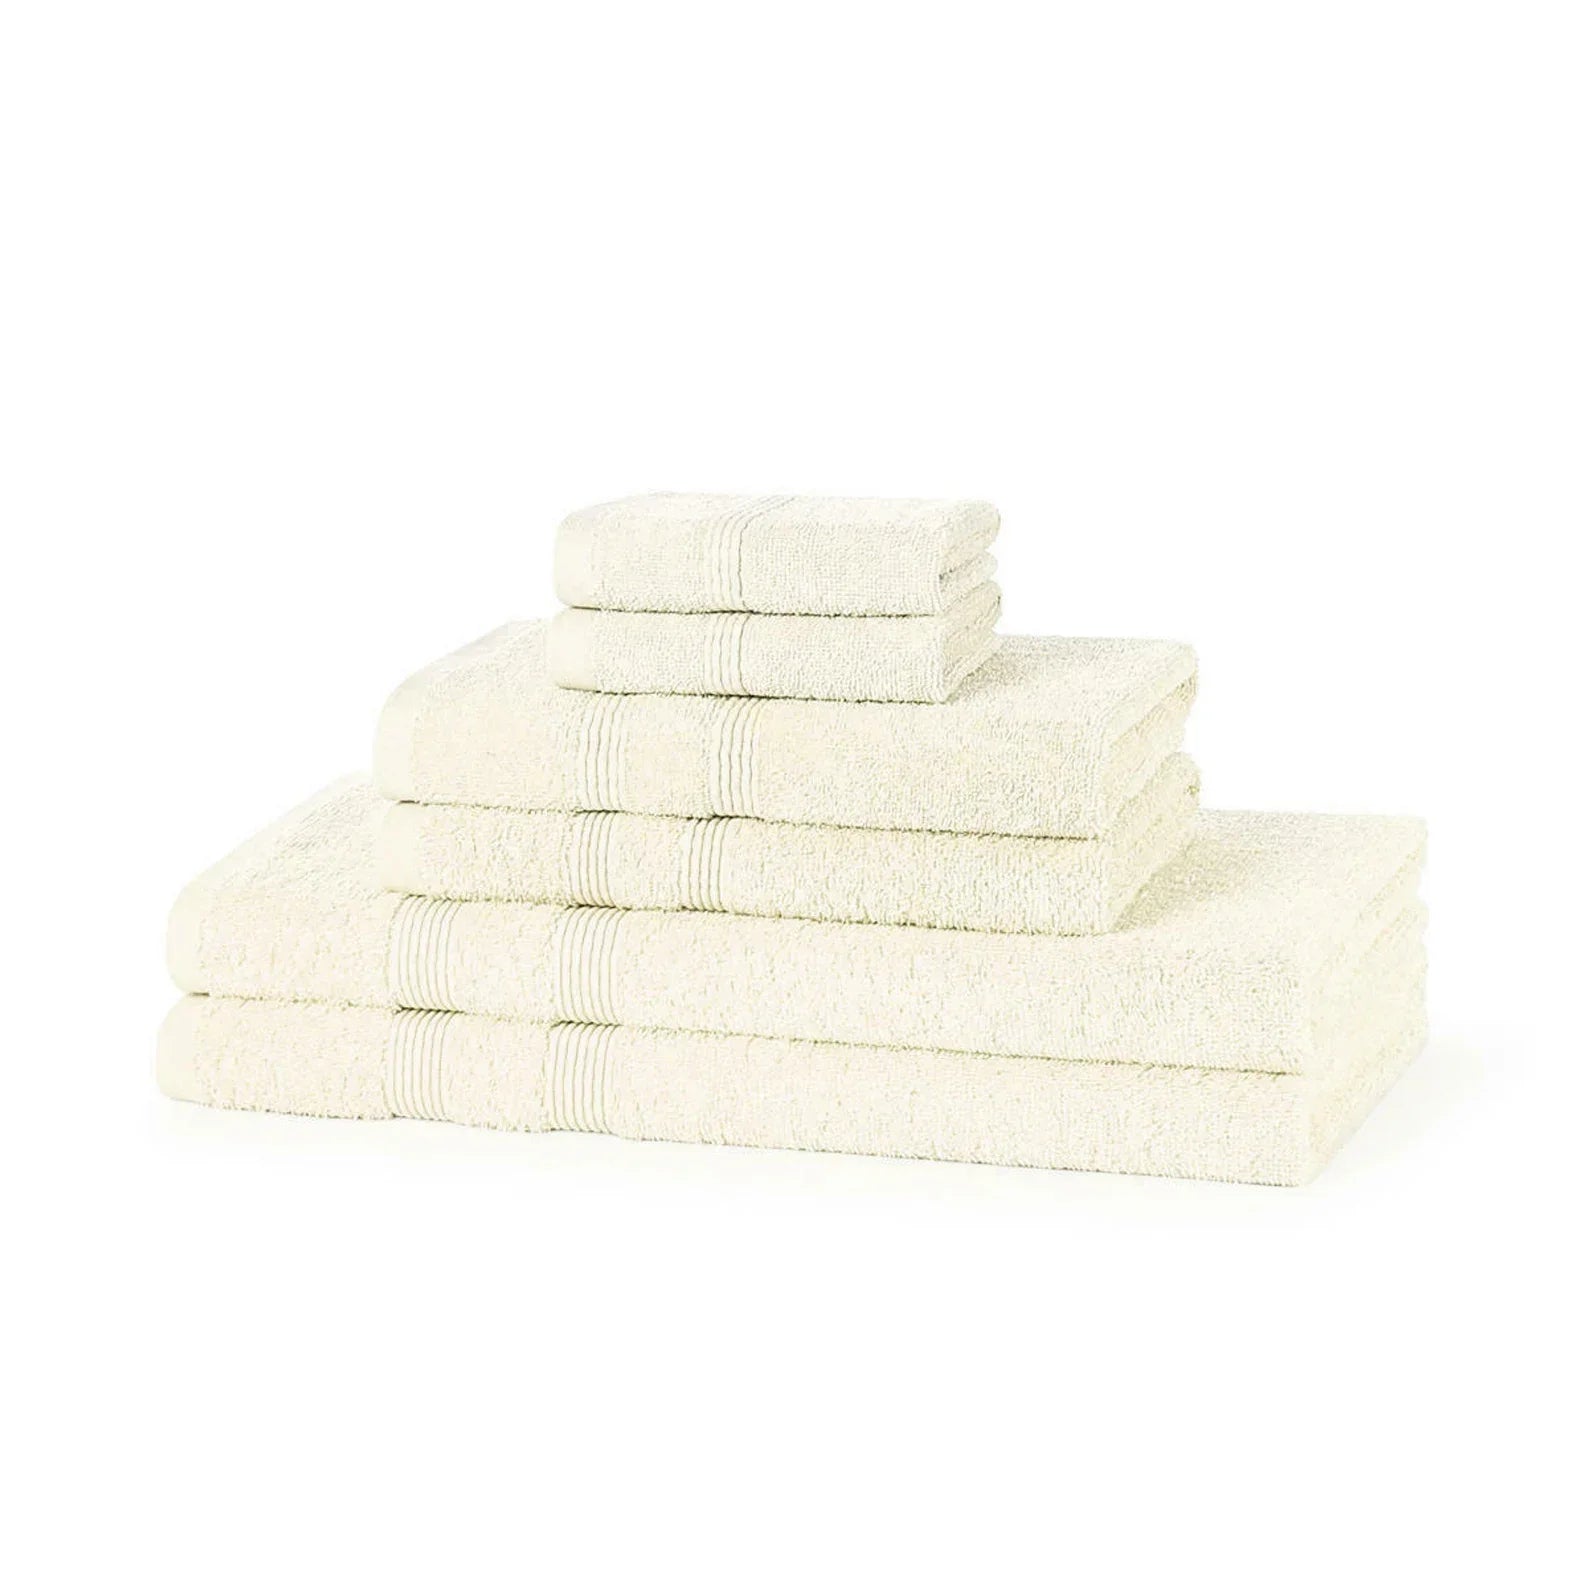 The Couture Bath Towel Set For One